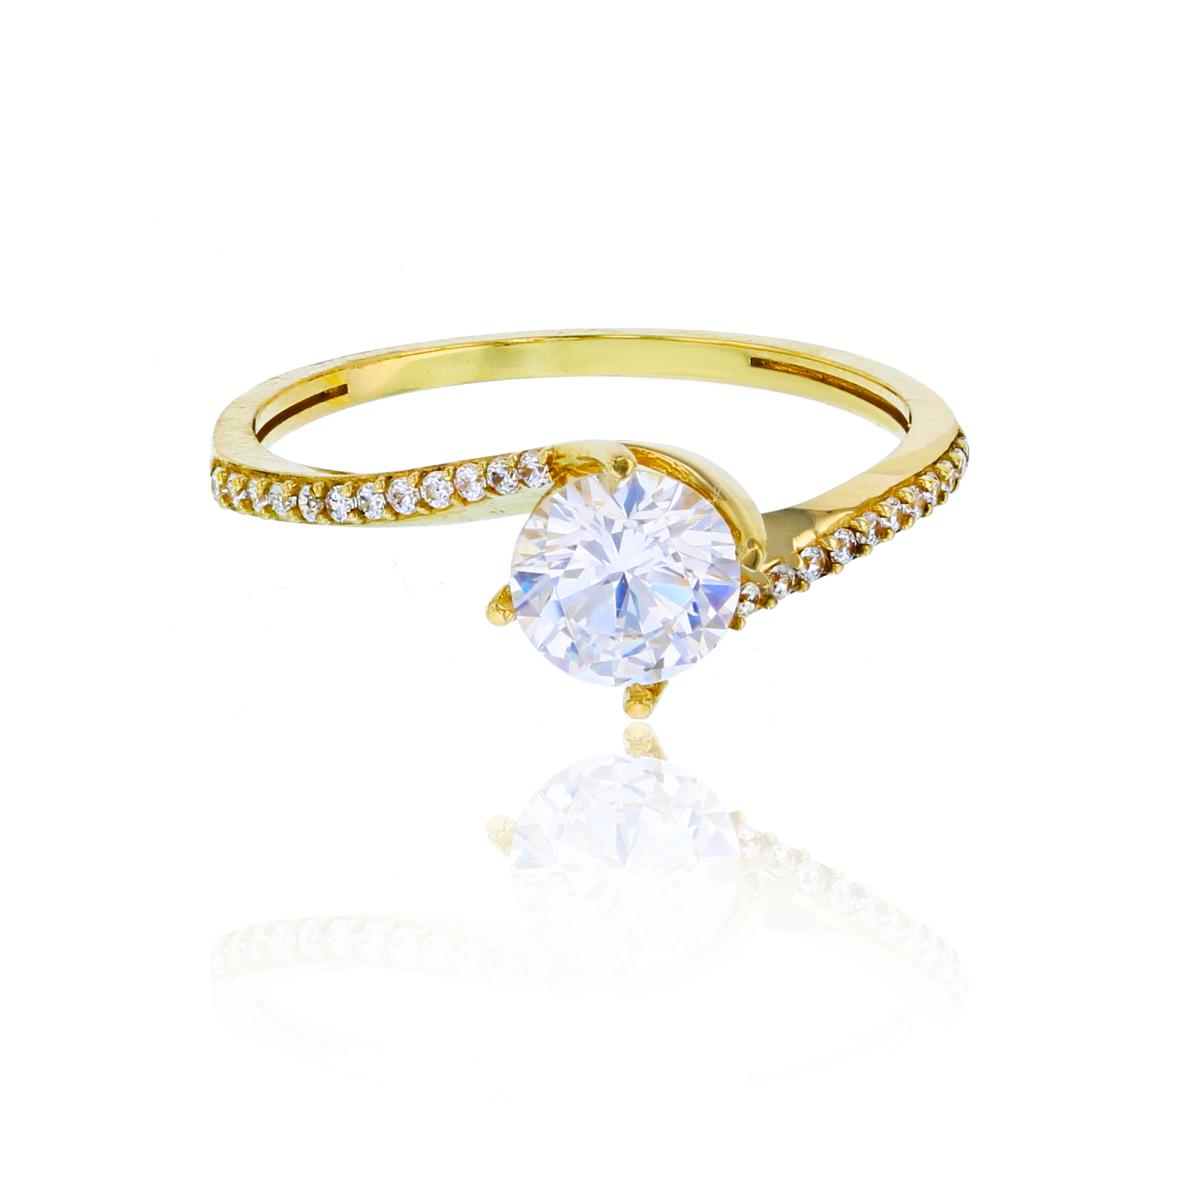 10K Yellow Gold 6mm Round Cut CZ Bypass Engagement Ring